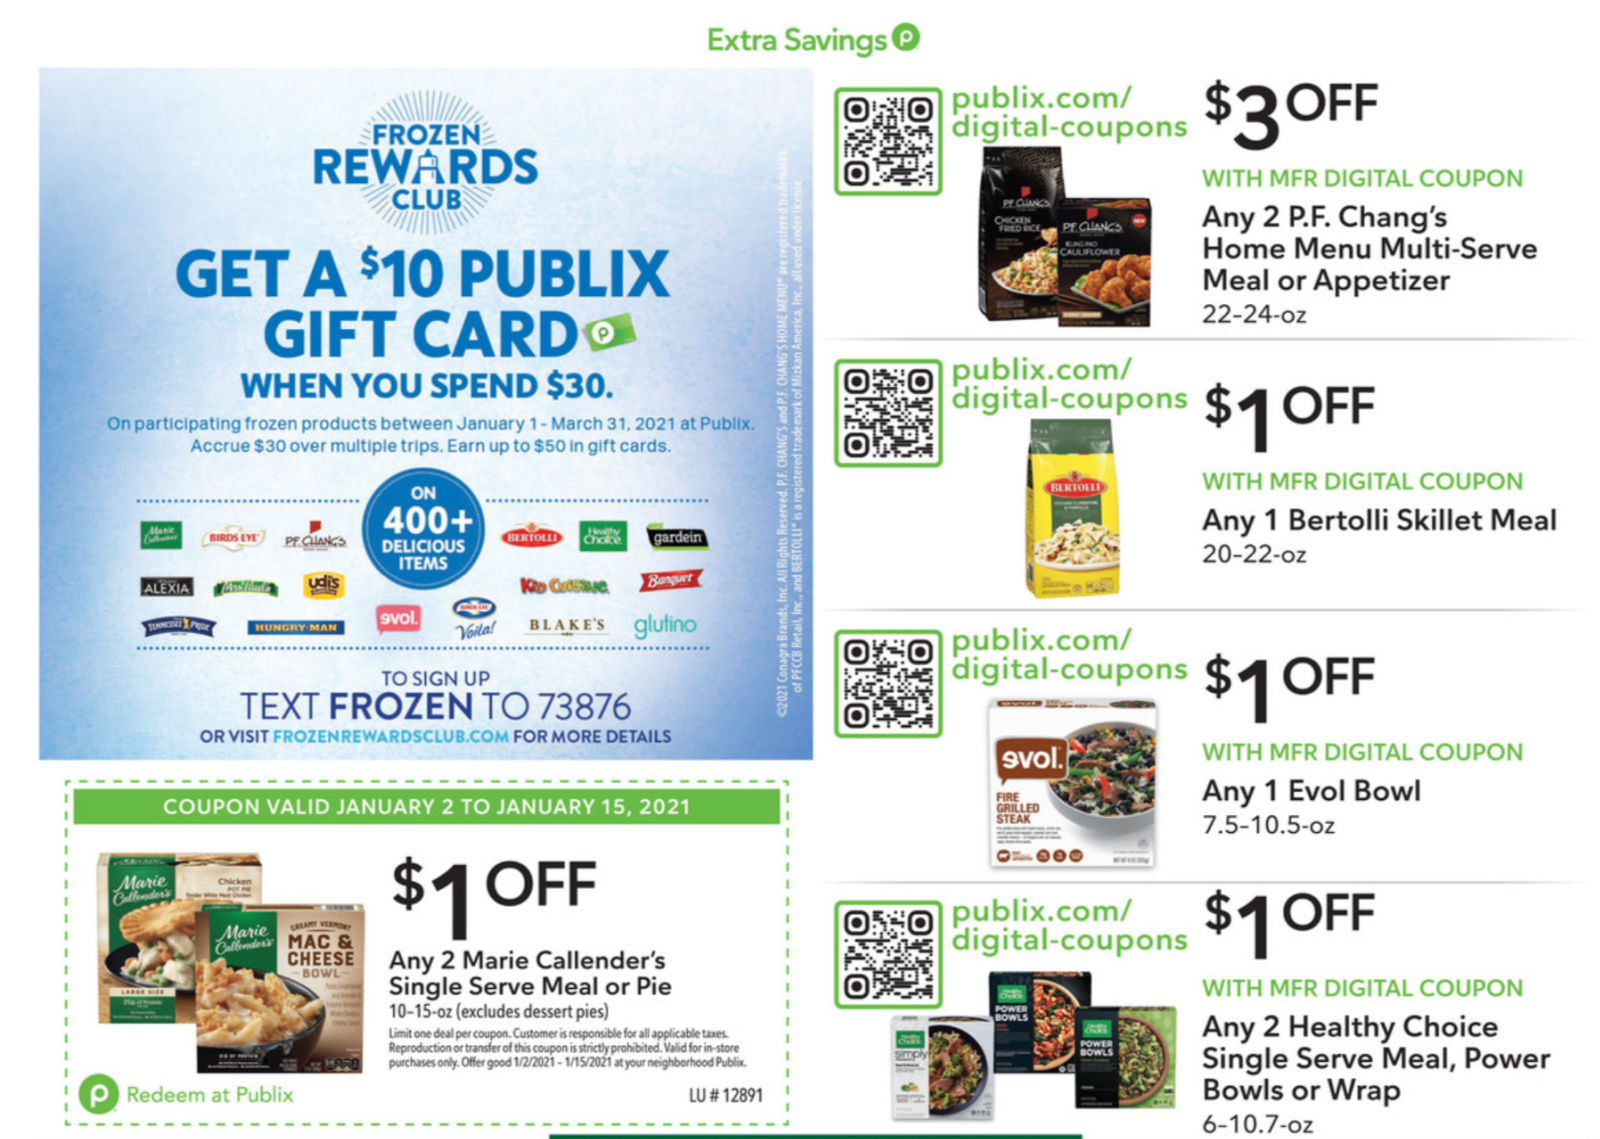 The Frozen Rewards Club Has Returned For 2021 - Earn Up To $50 In Publix Gift Cards! on I Heart Publix 1